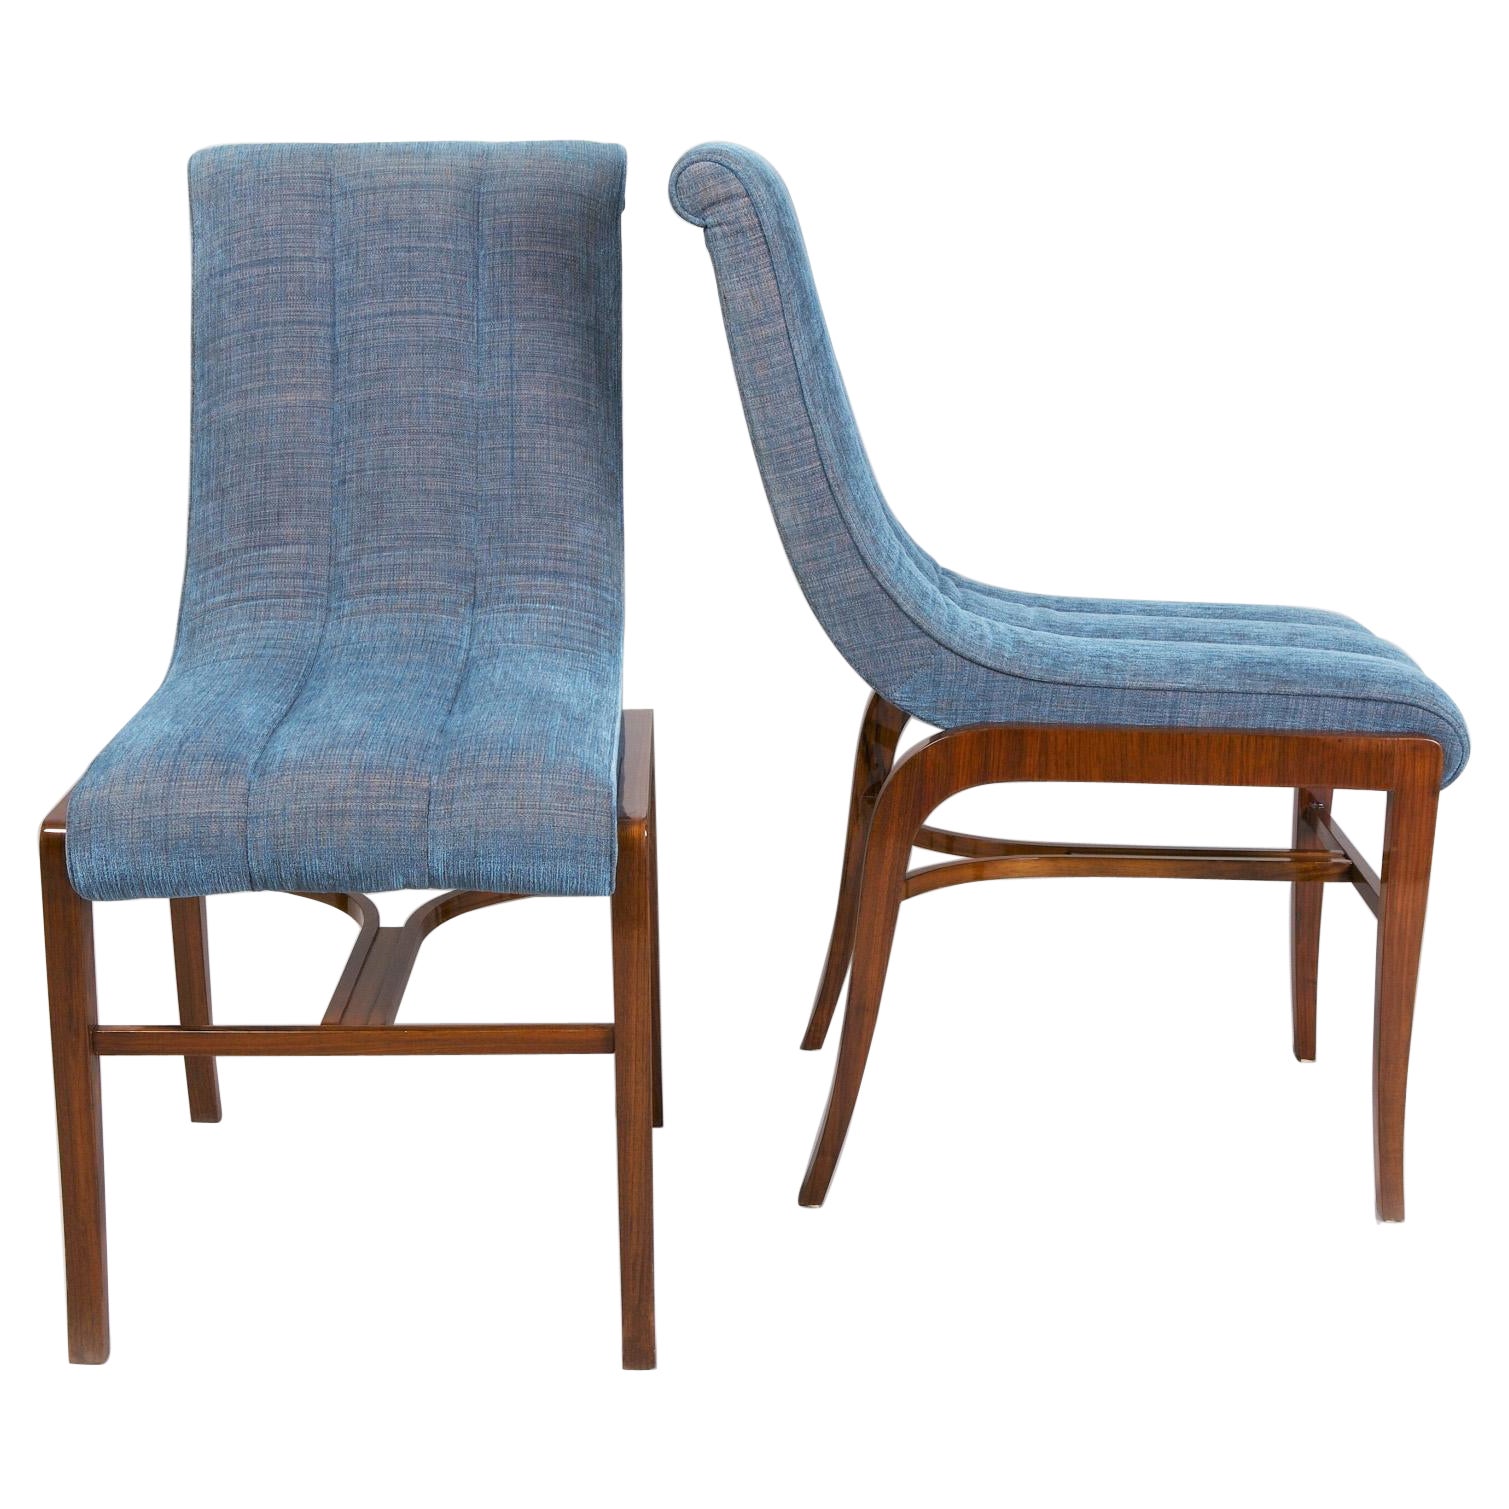 Restored French Art Deco Chairs Designed by Jules Leleu, 1920-1929, 2 Pieces For Sale